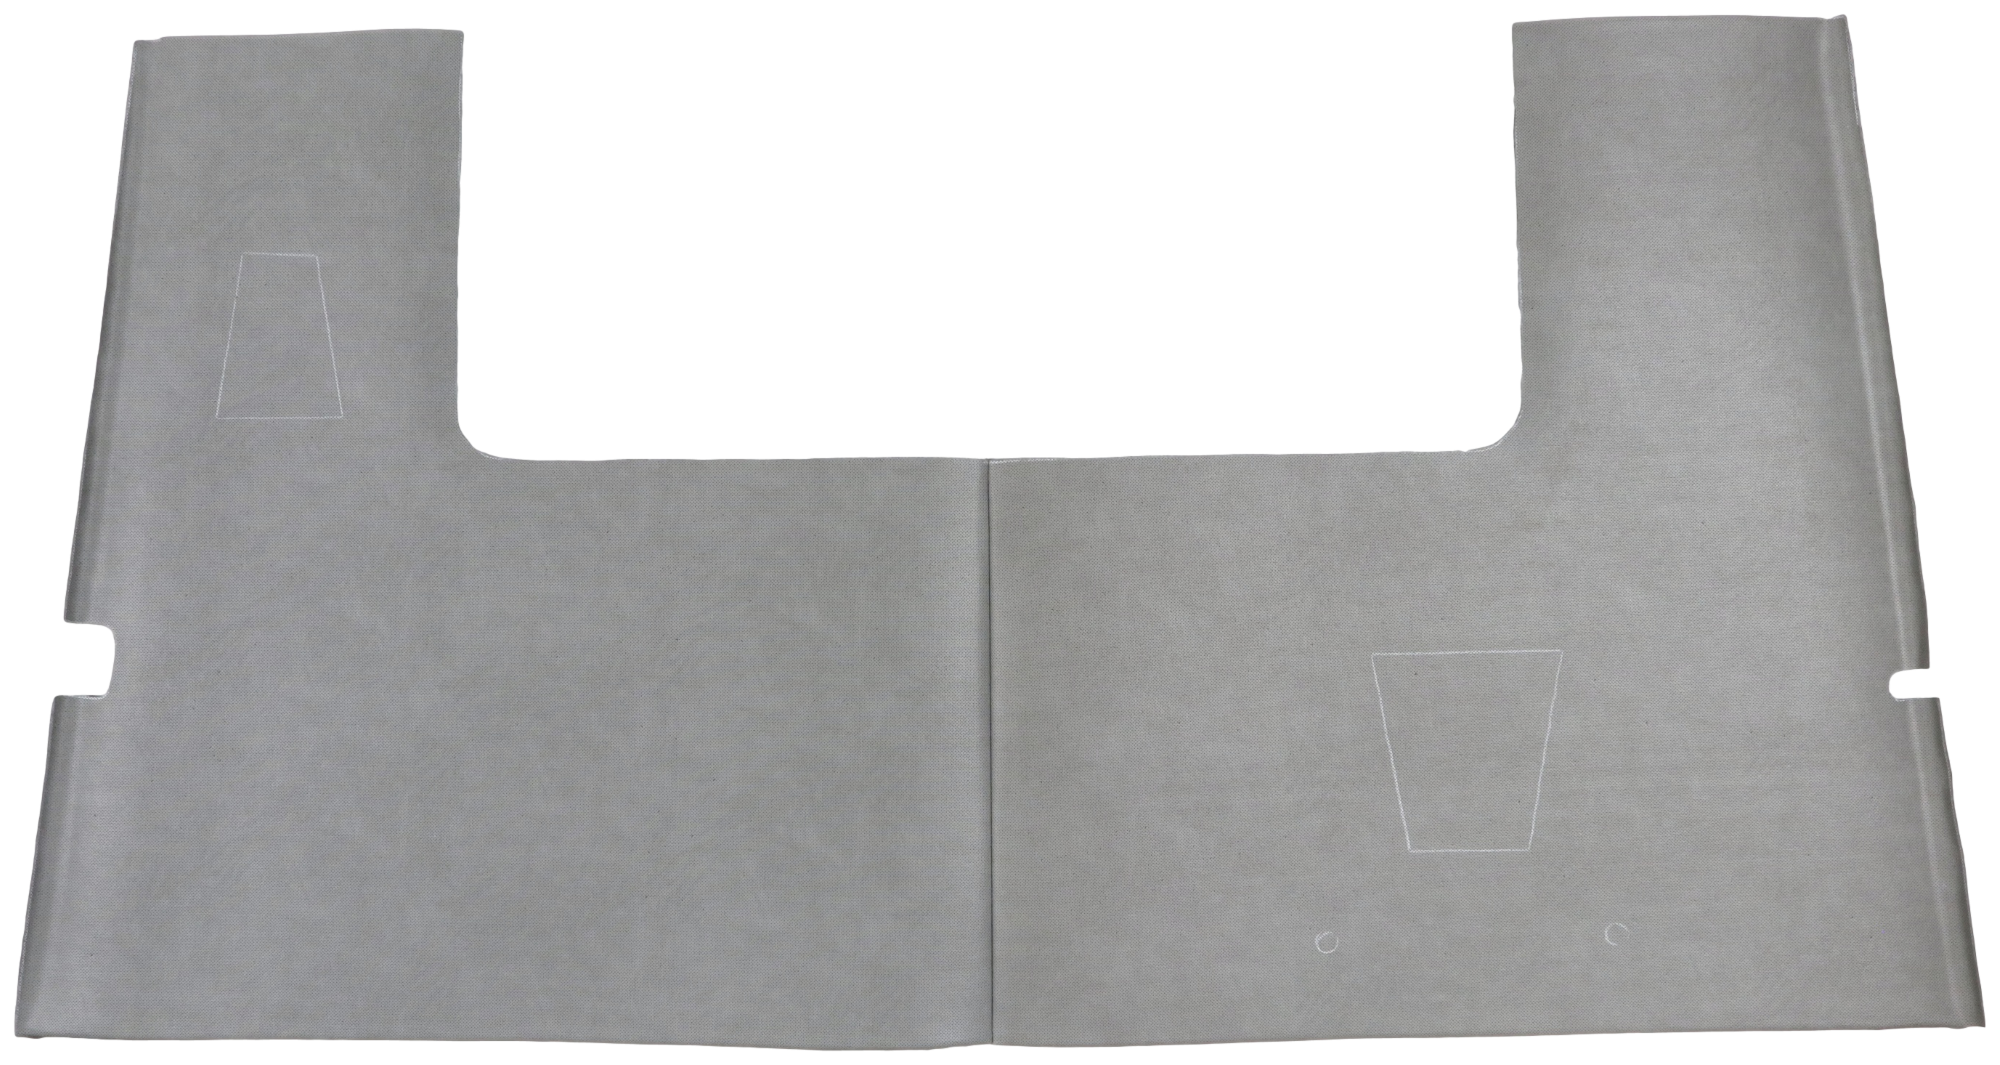 CIH 2144-2588 BACK PANEL COVER MATERIAL Questions & Answers